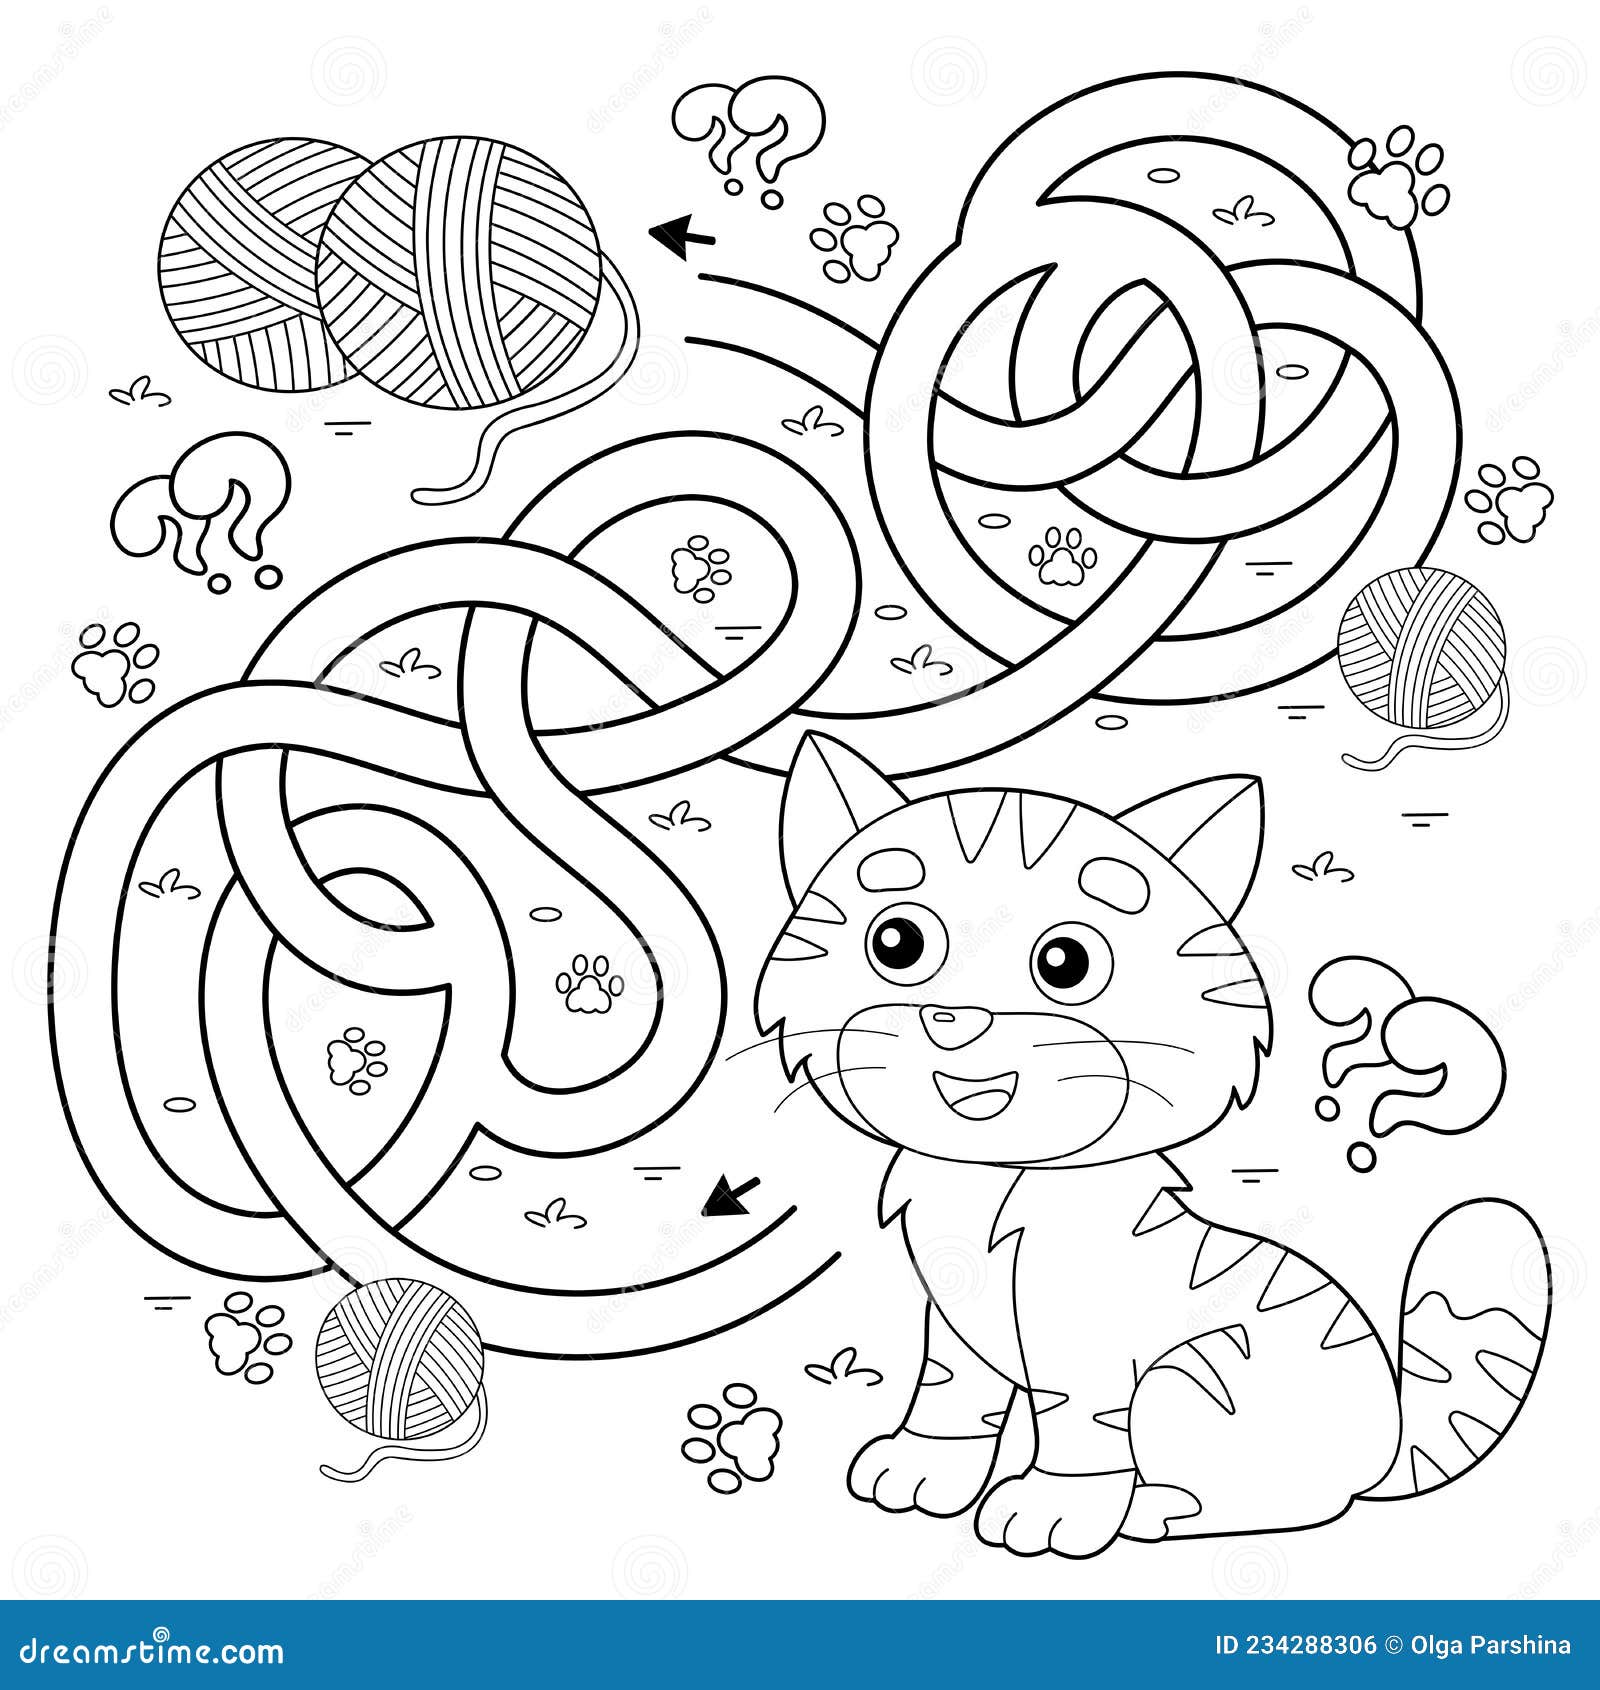 Maze or labyrinth game puzzle tangled road coloring page outline of cartoon cat with ball of yarn stock vector